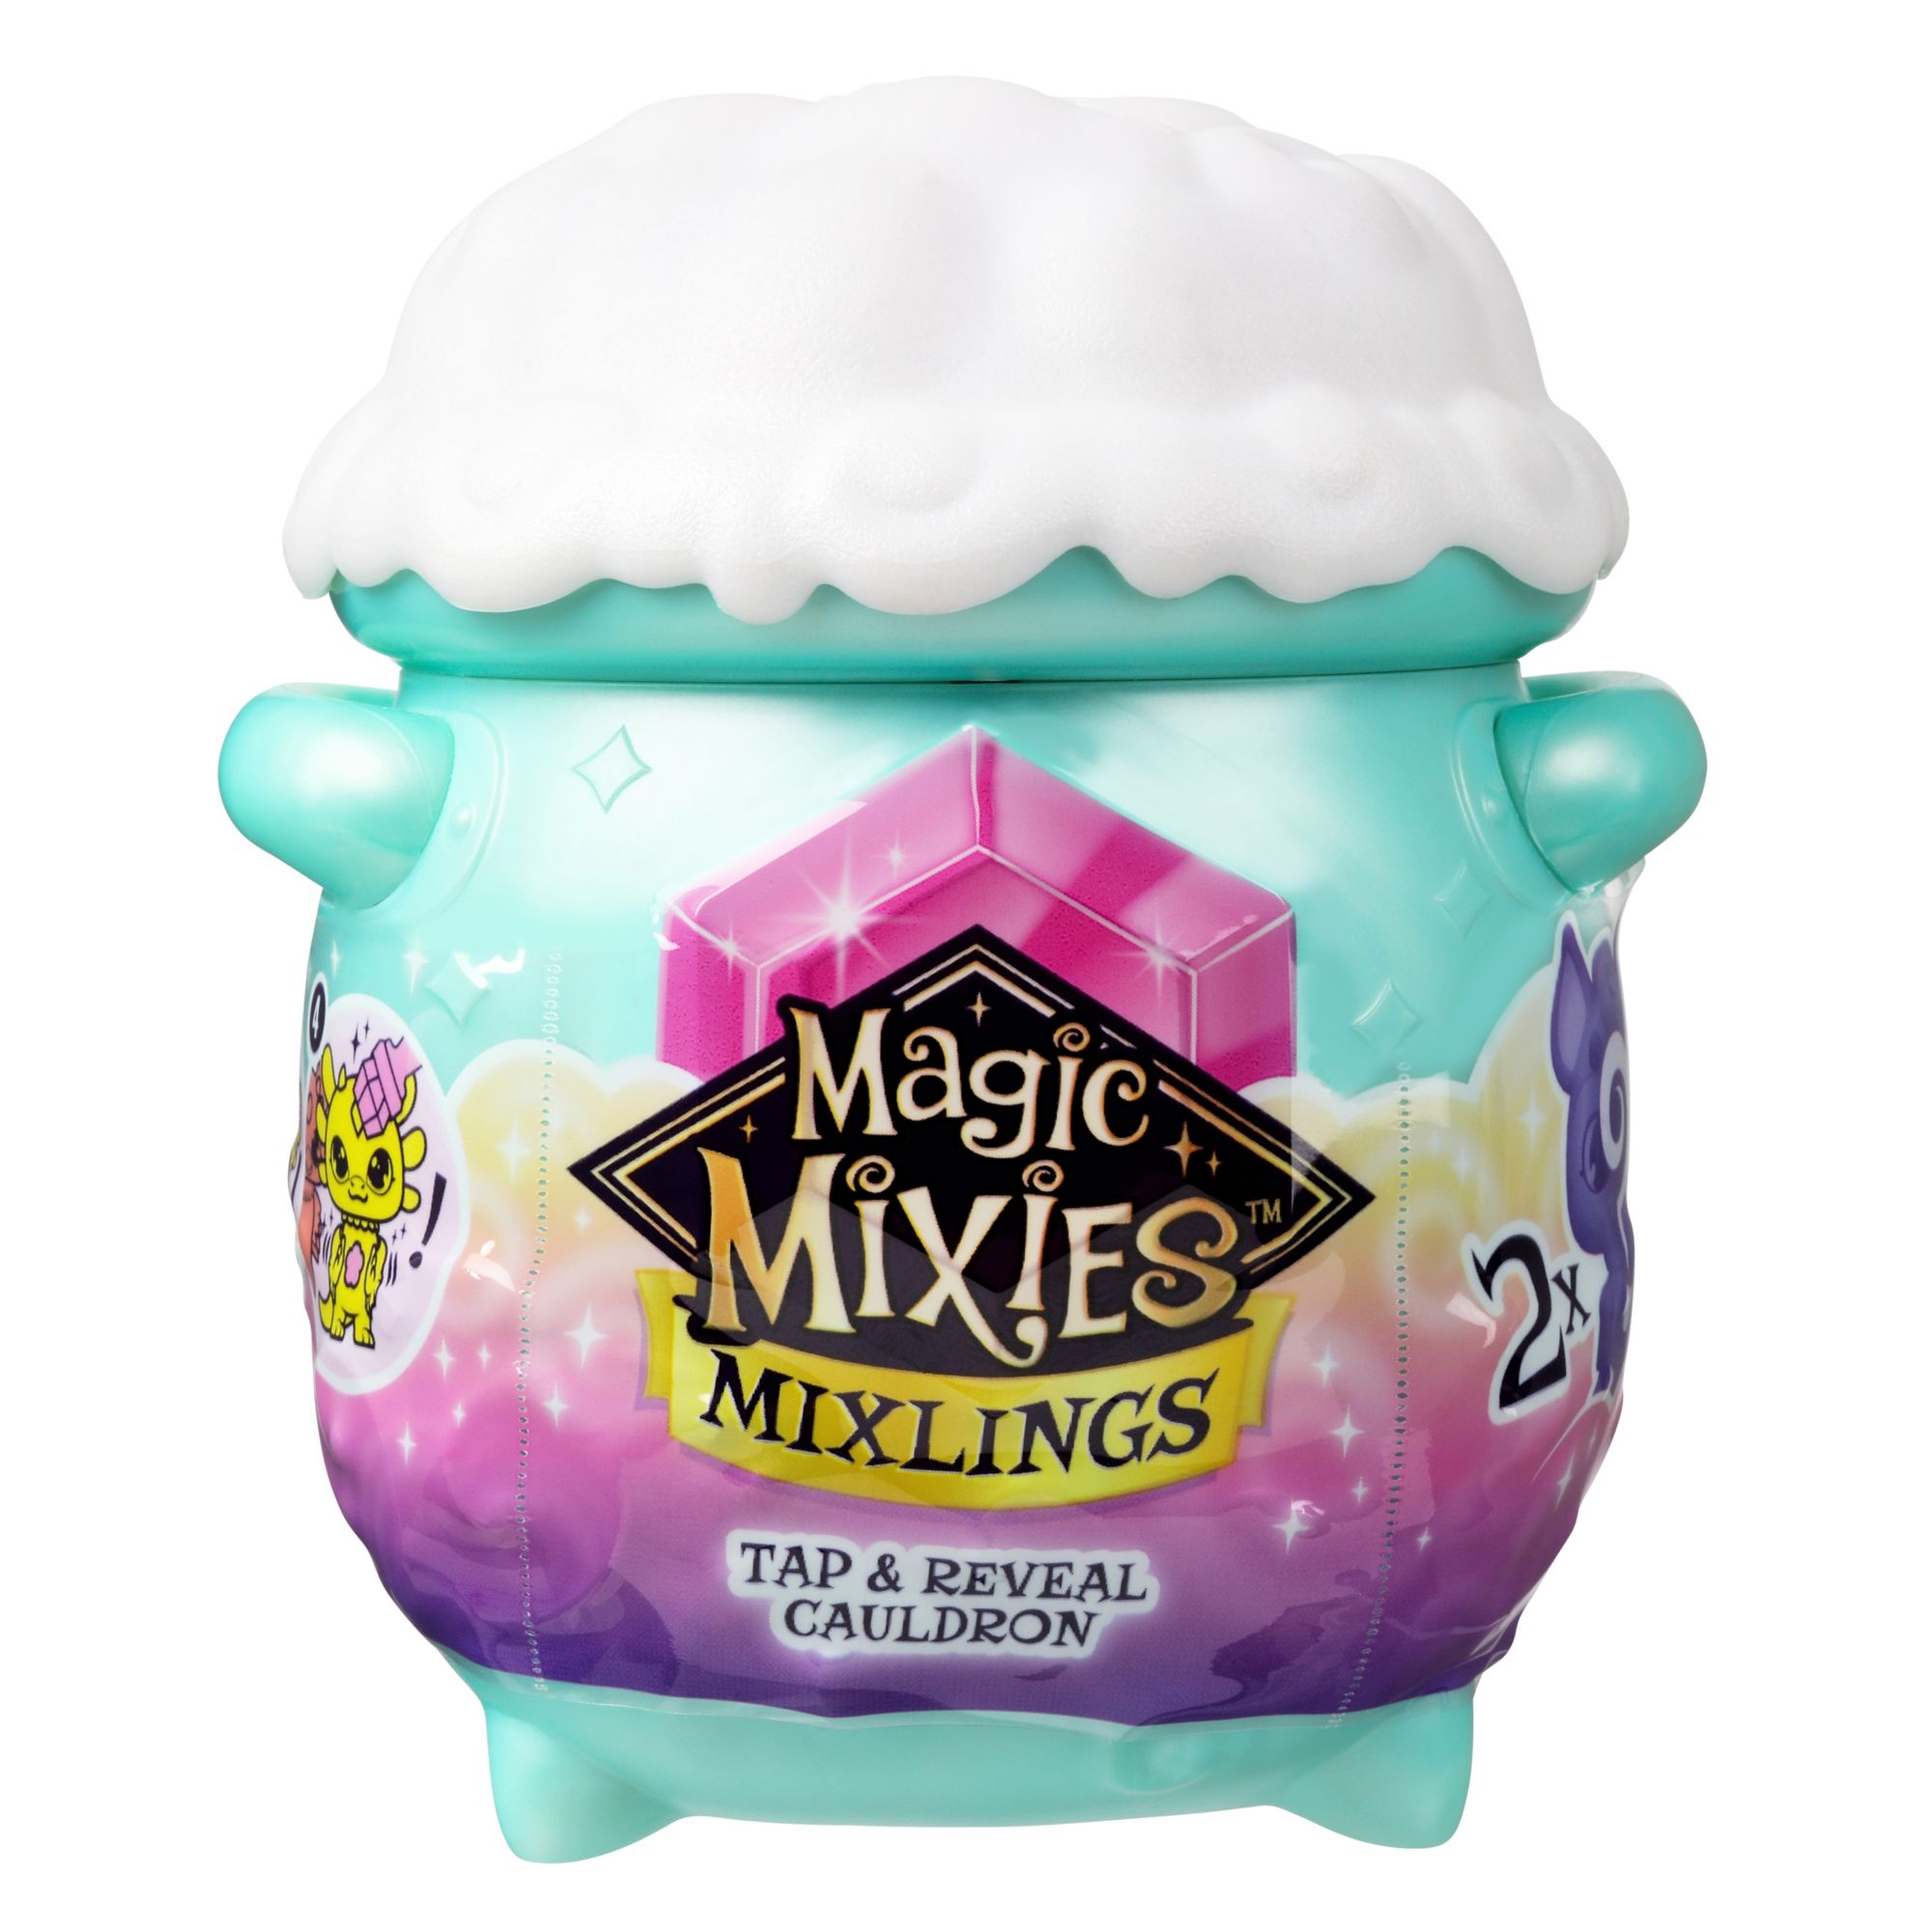 Compare prices for Magic Mixies - Mixlings across all European  stores